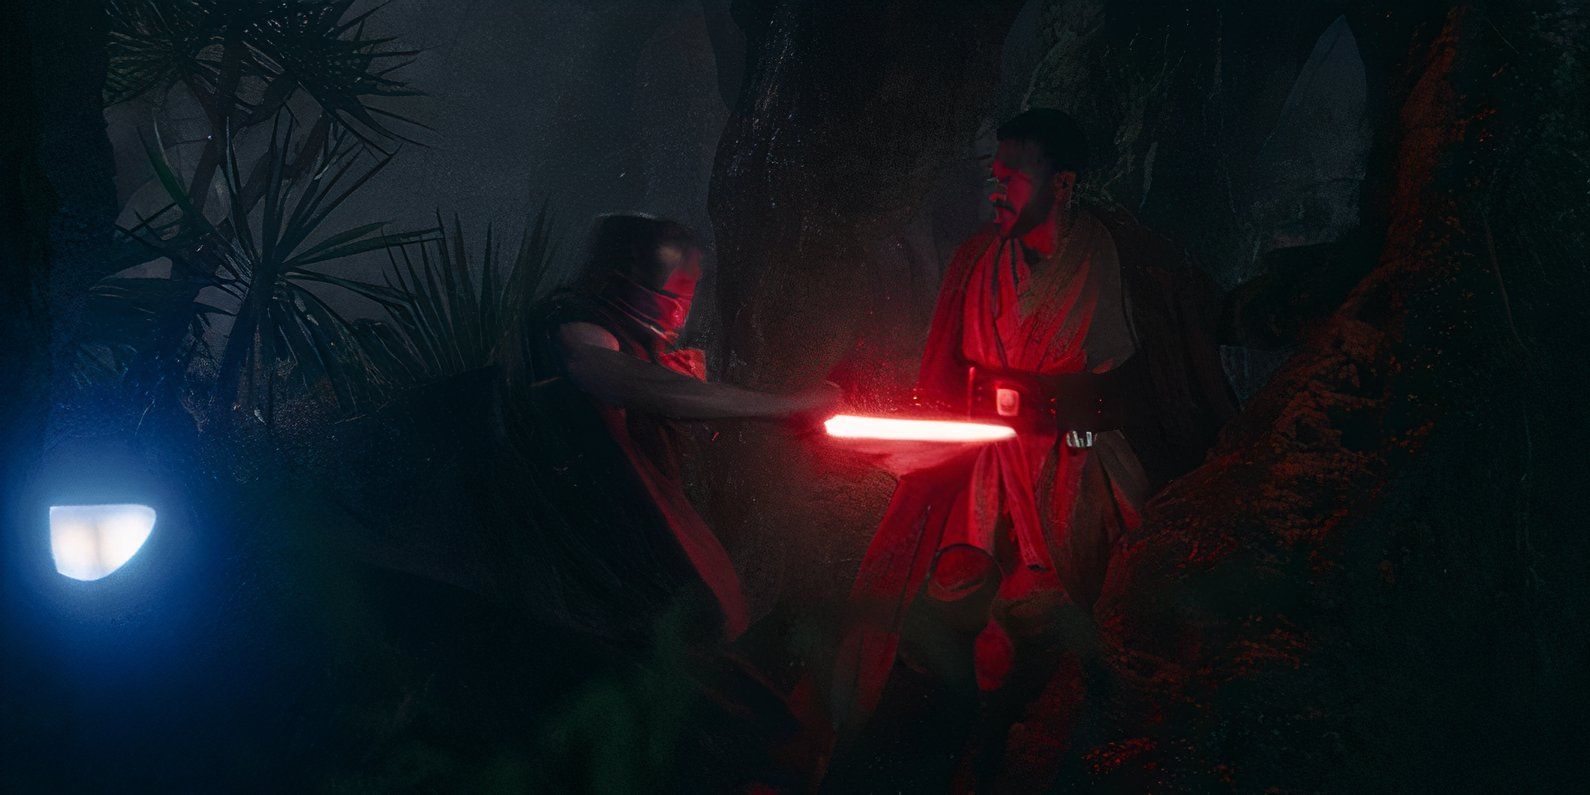 The Sith Lord slashes a Jedi through the abdomen, killing him, in The Acolyte episode 5